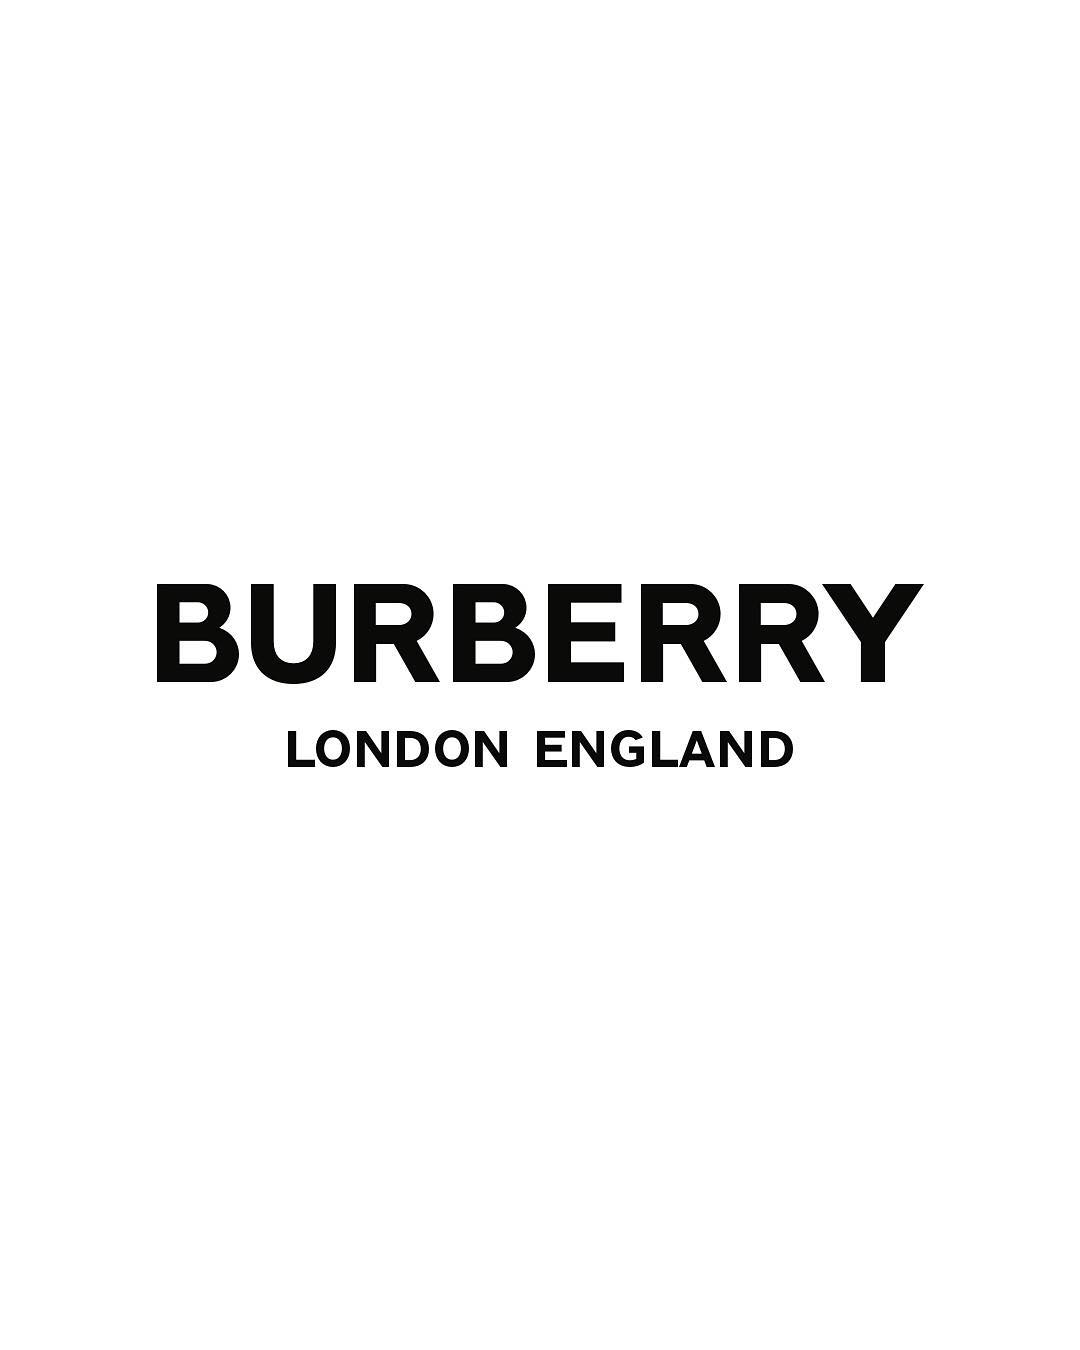 Detailed Black and White Brand Logo - Burberry unveils new logo for first time in 20 years under Riccardo ...